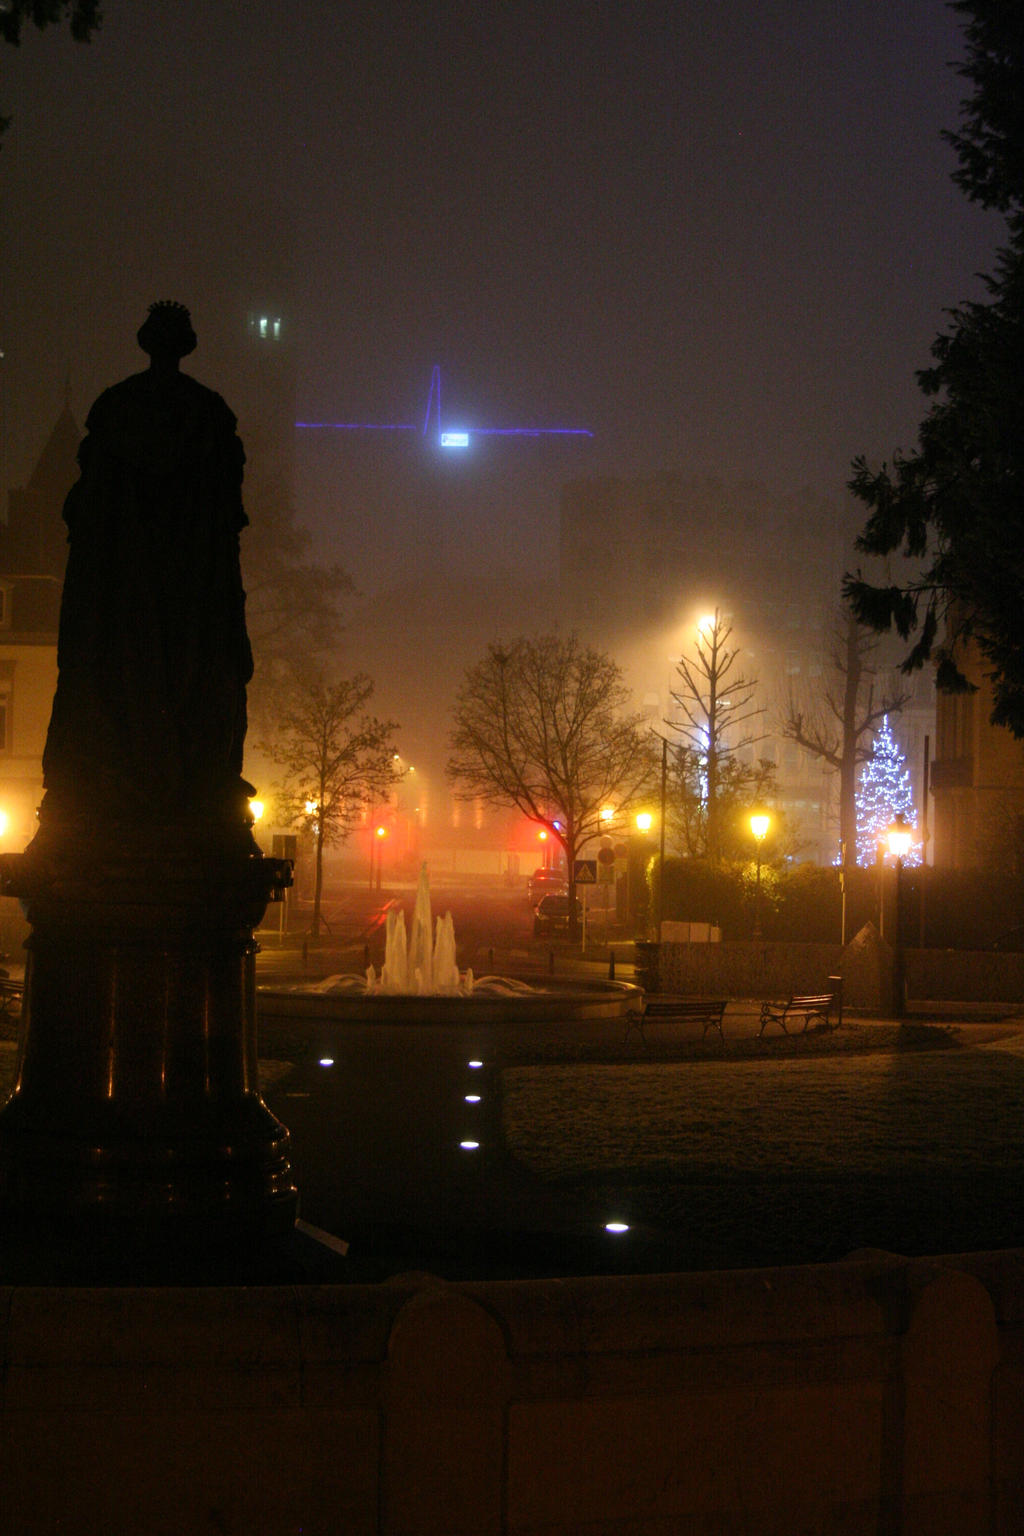 The statue and the nightlife